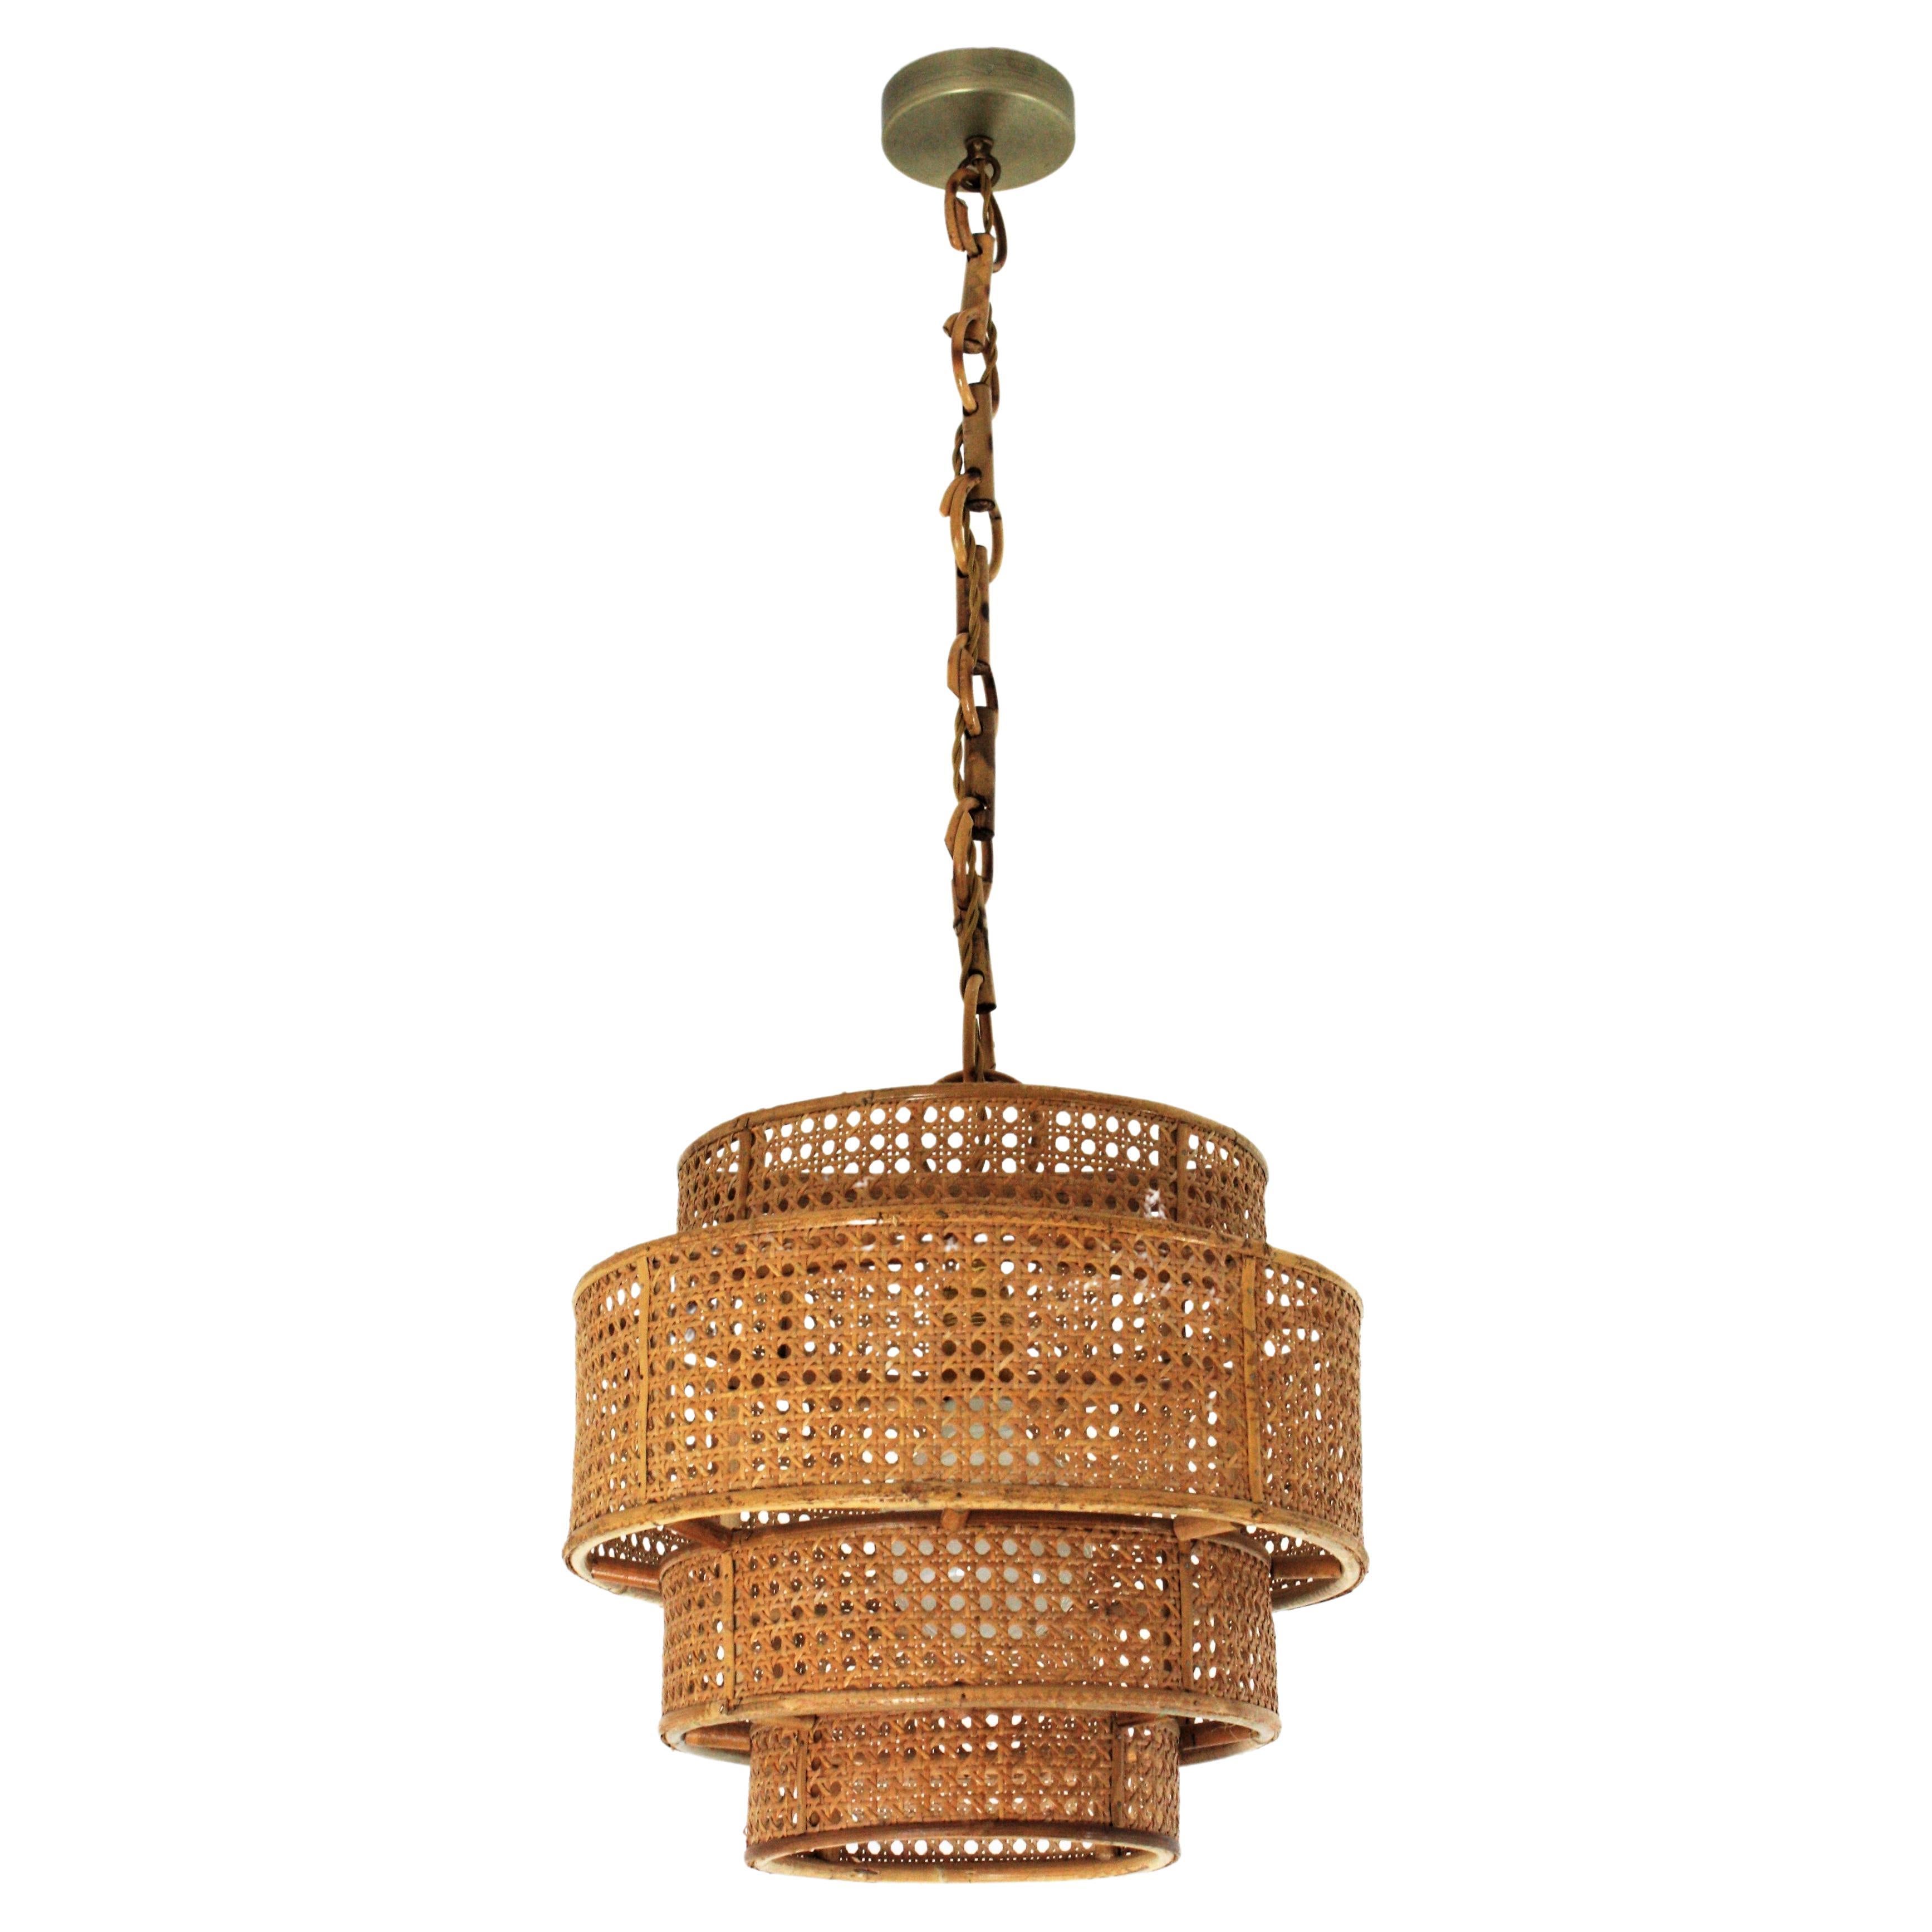  Rattan Wicker Weave Concentric Cylinder Pendant Hanging Light  For Sale